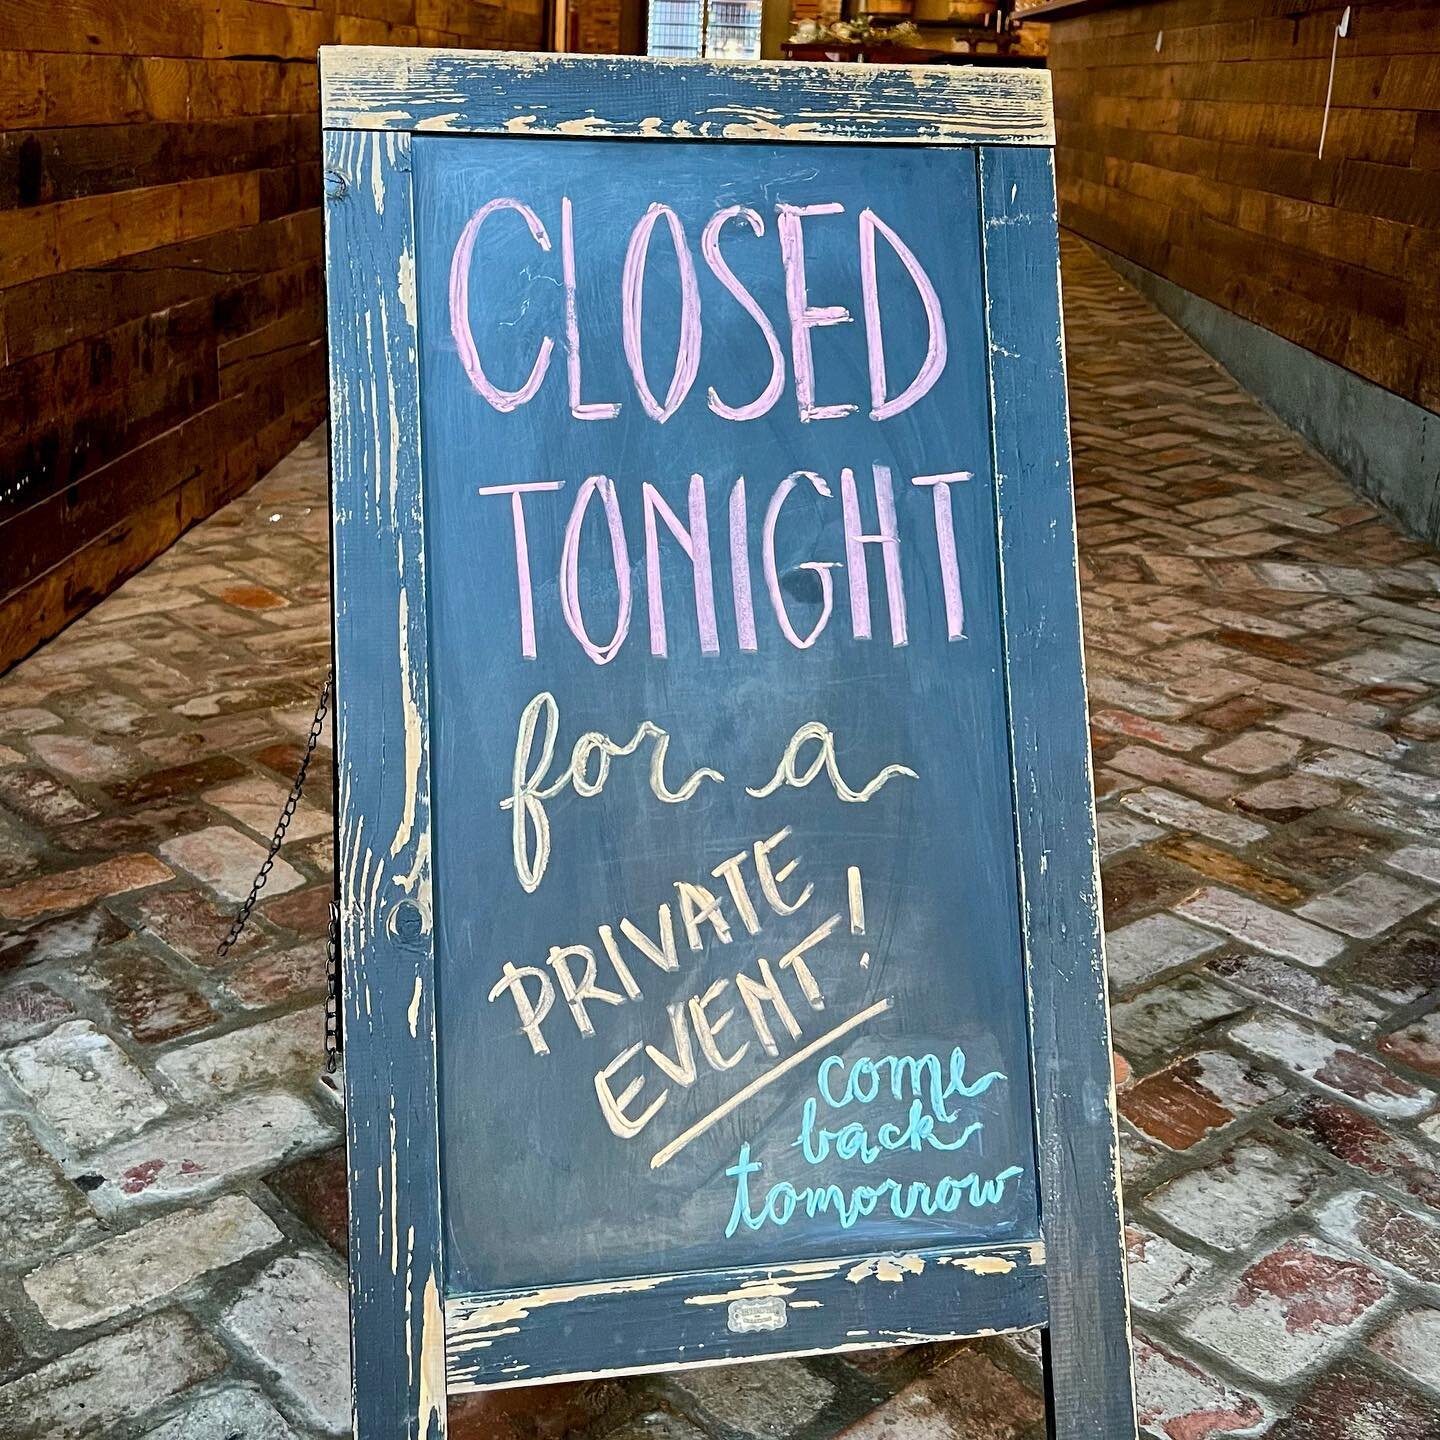 Just a little reminder, the taproom will be closed this evening, Friday 3/24, for a Private Event, and will return to regular hours tomorrow for the Fourth Saturday Market with live music from @mattmcmillanandthecitylimits food from Pretoria Eats, @s